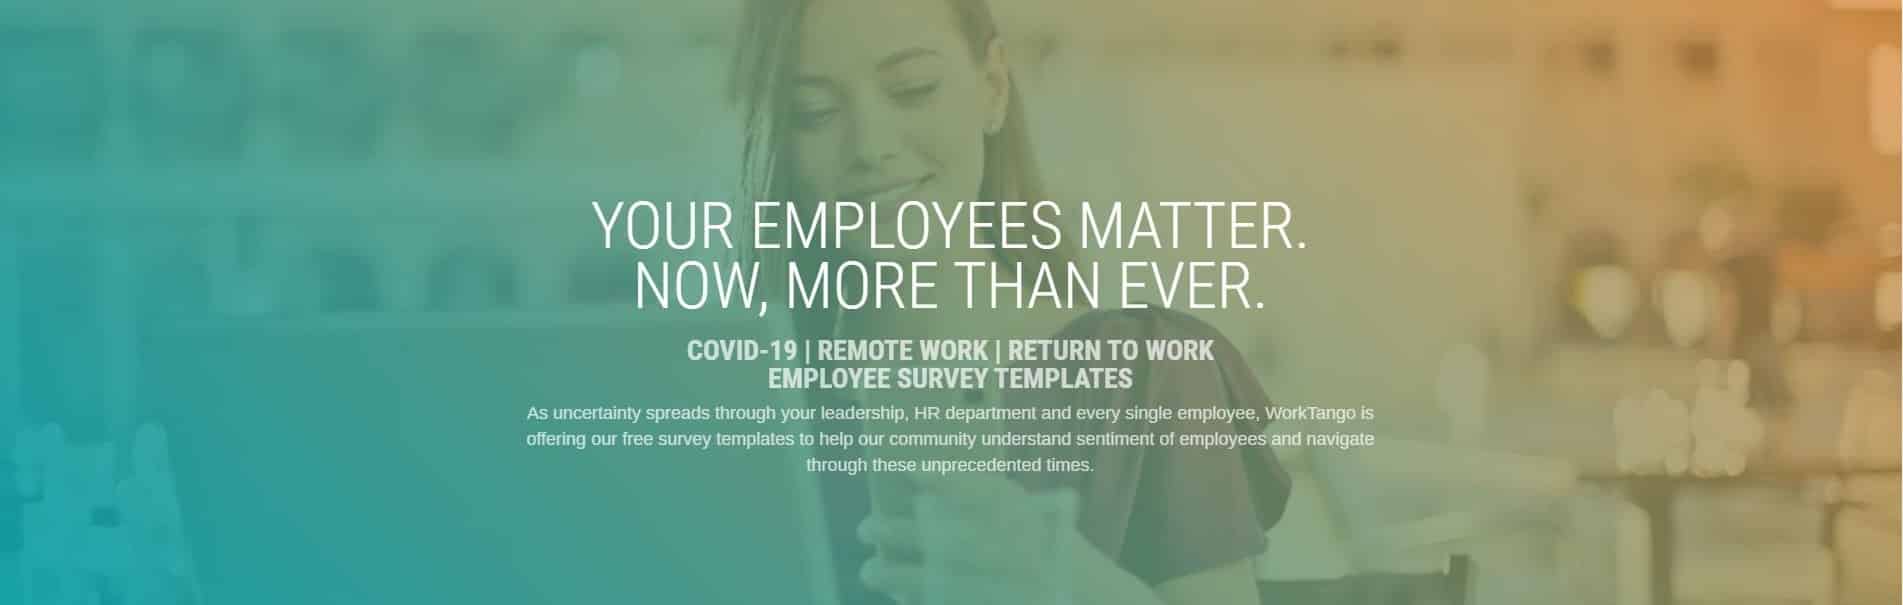 Return to Work Remote Work Psychological Health Safety Covid-19 Employee Survey Templates